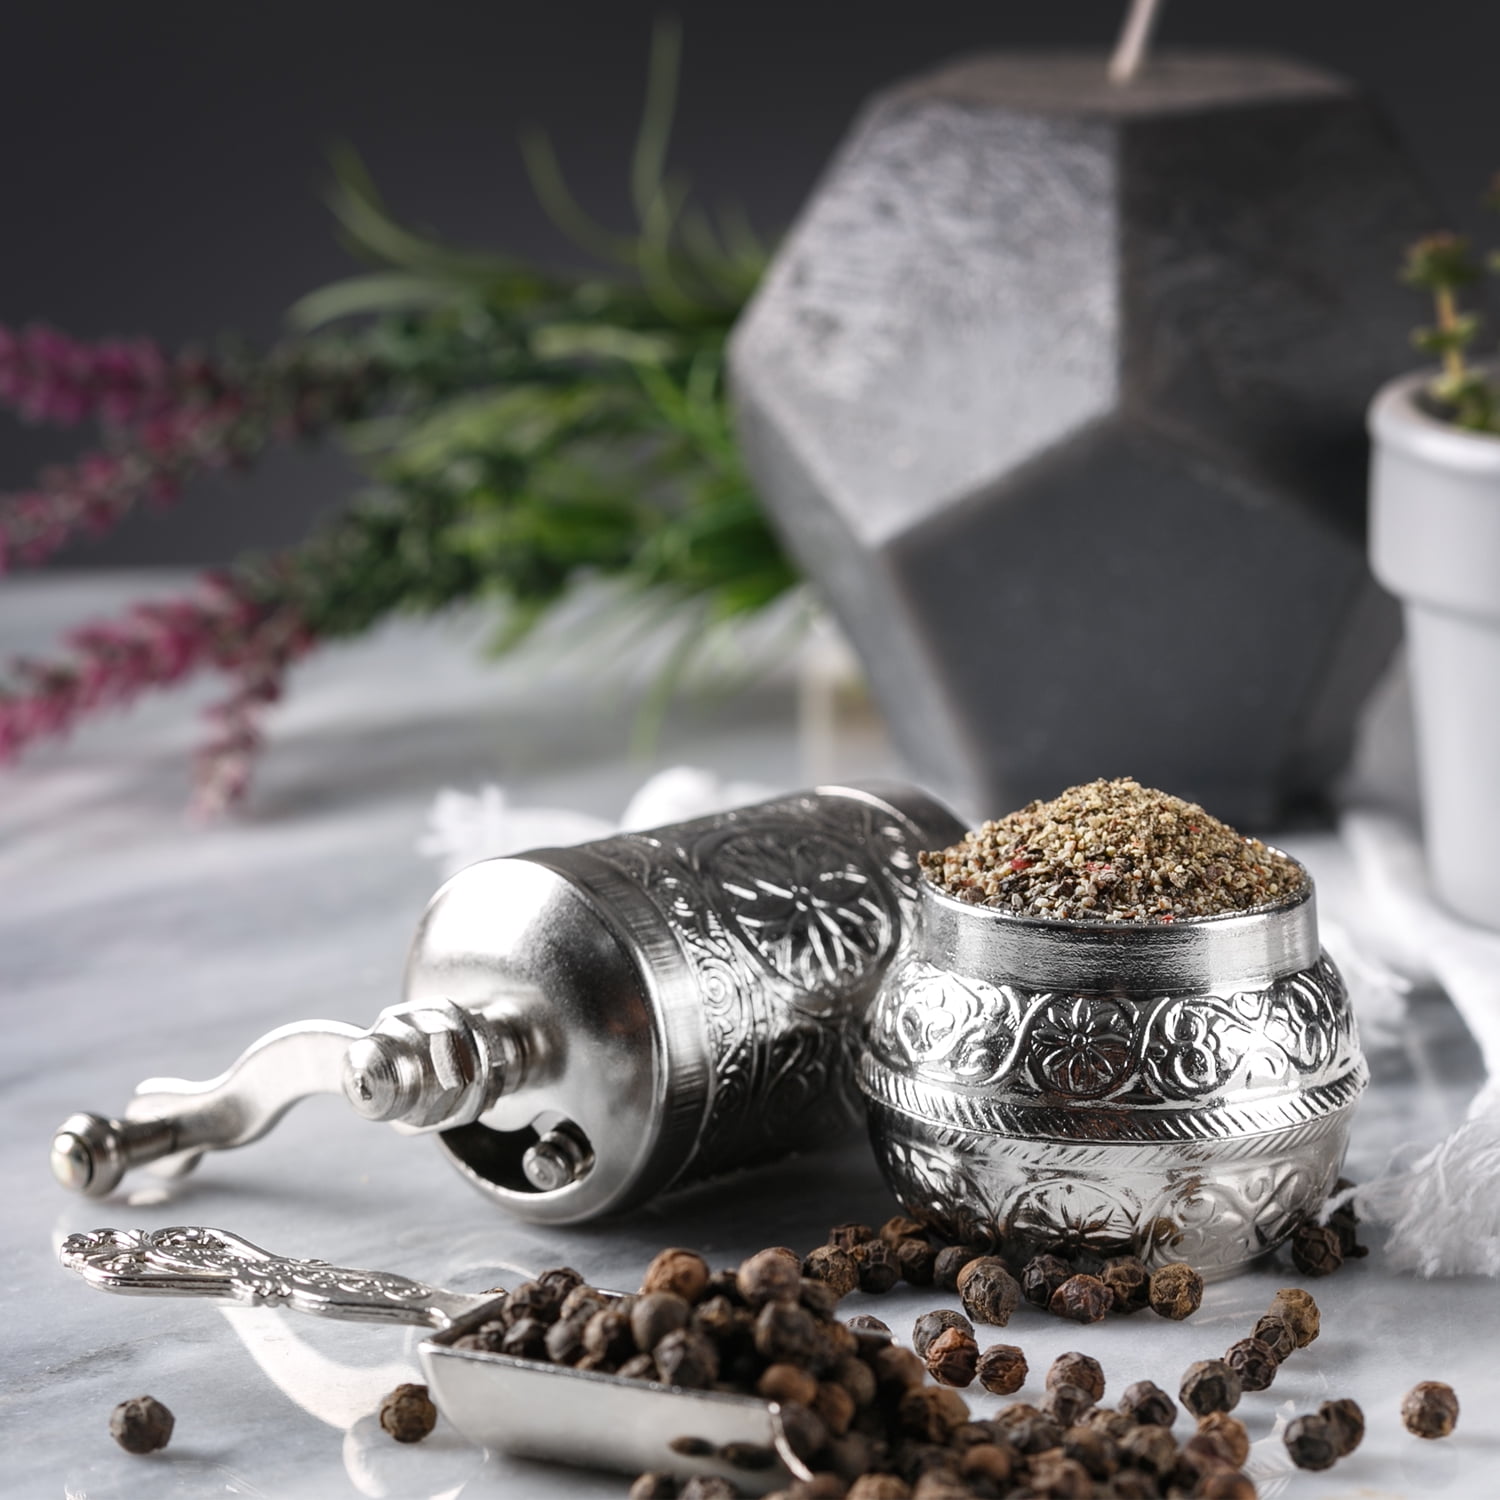 Crystalia Black Pepper and Spice Grinder, Manual Pepper Mill with Handle - Bright Silver